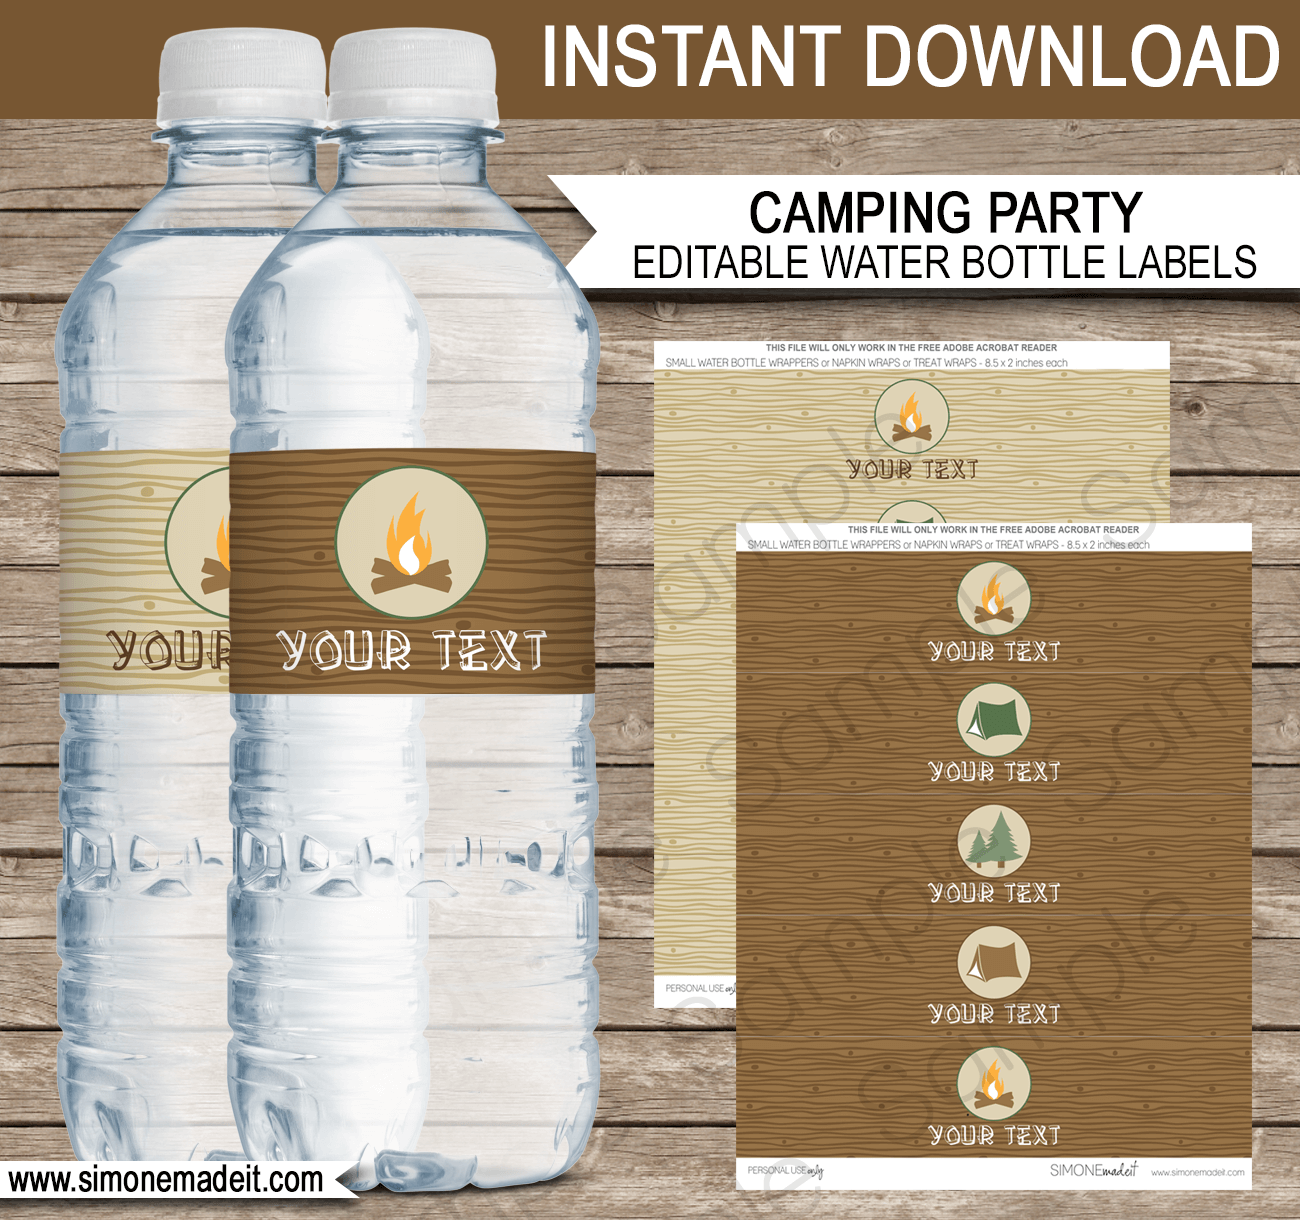 Camping Party Water Bottle Labels | Birthday Party | Editable DIY Template | $3.00 INSTANT DOWNLOAD via SIMONEmadeit.com